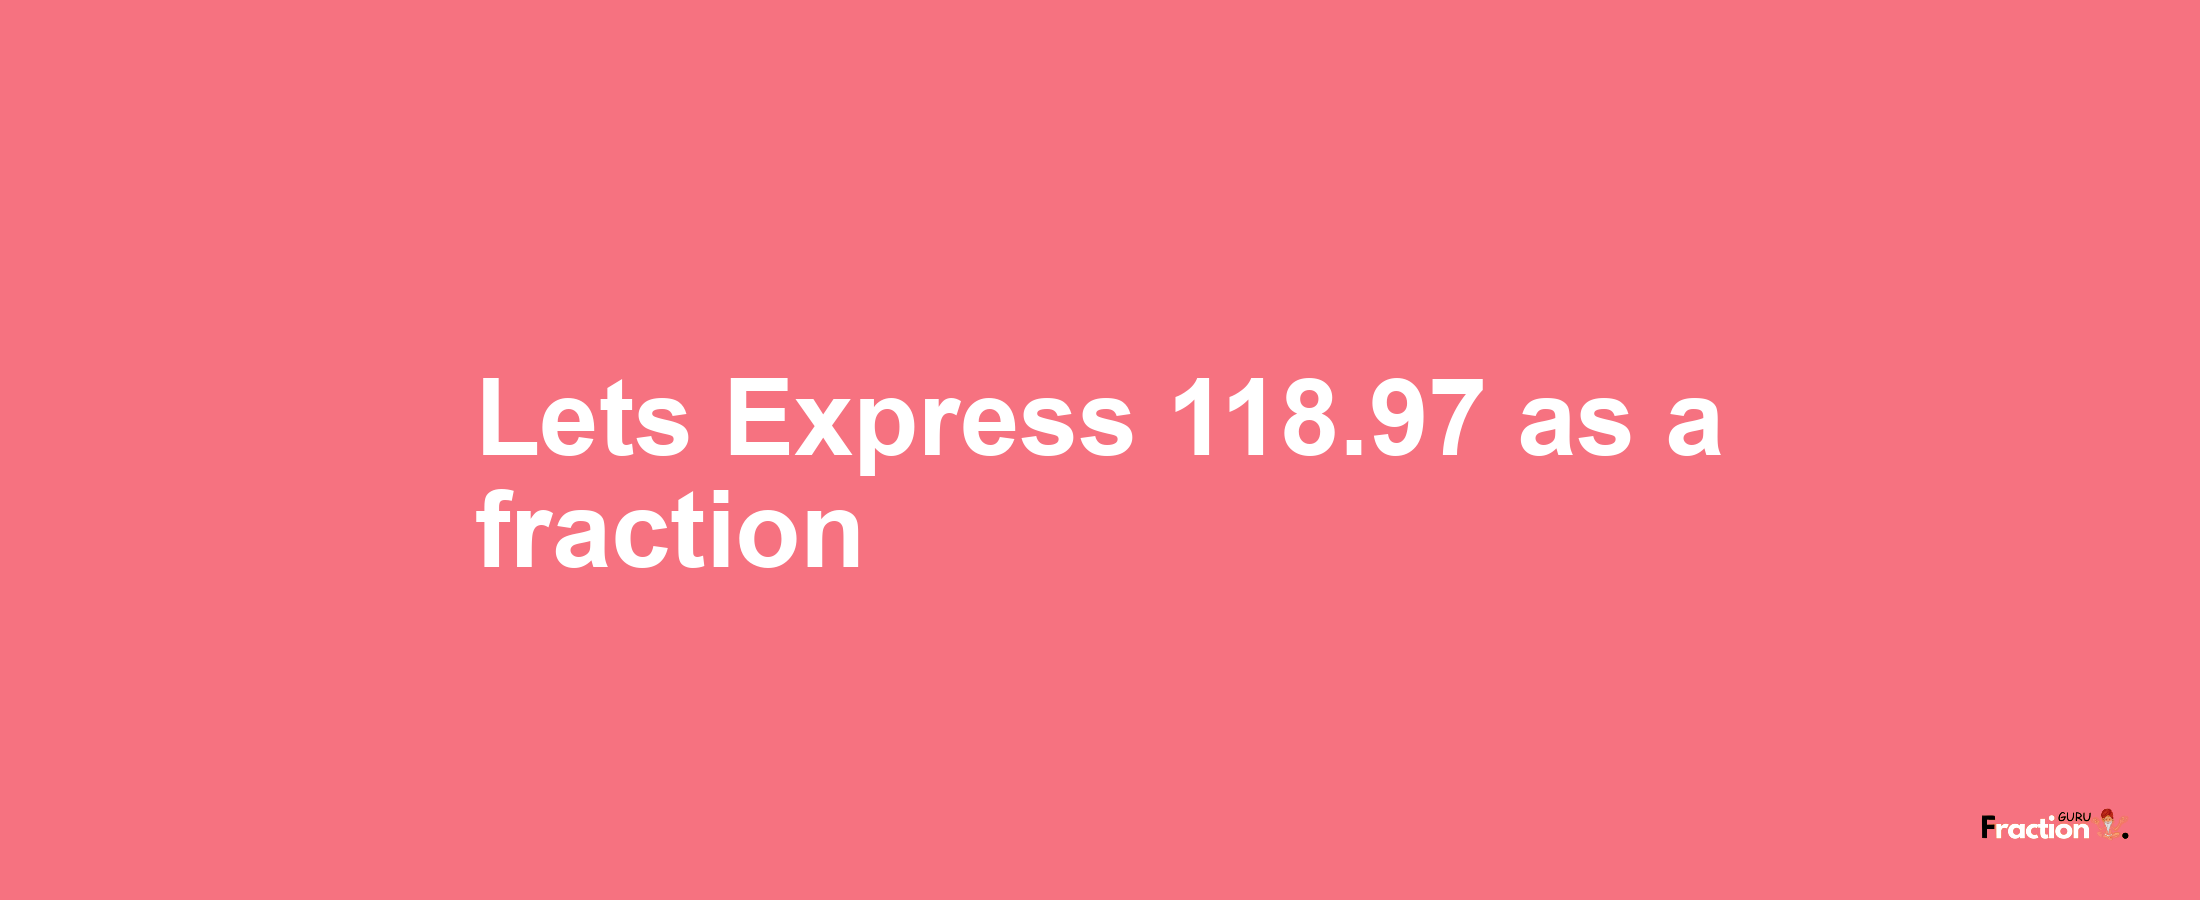 Lets Express 118.97 as afraction